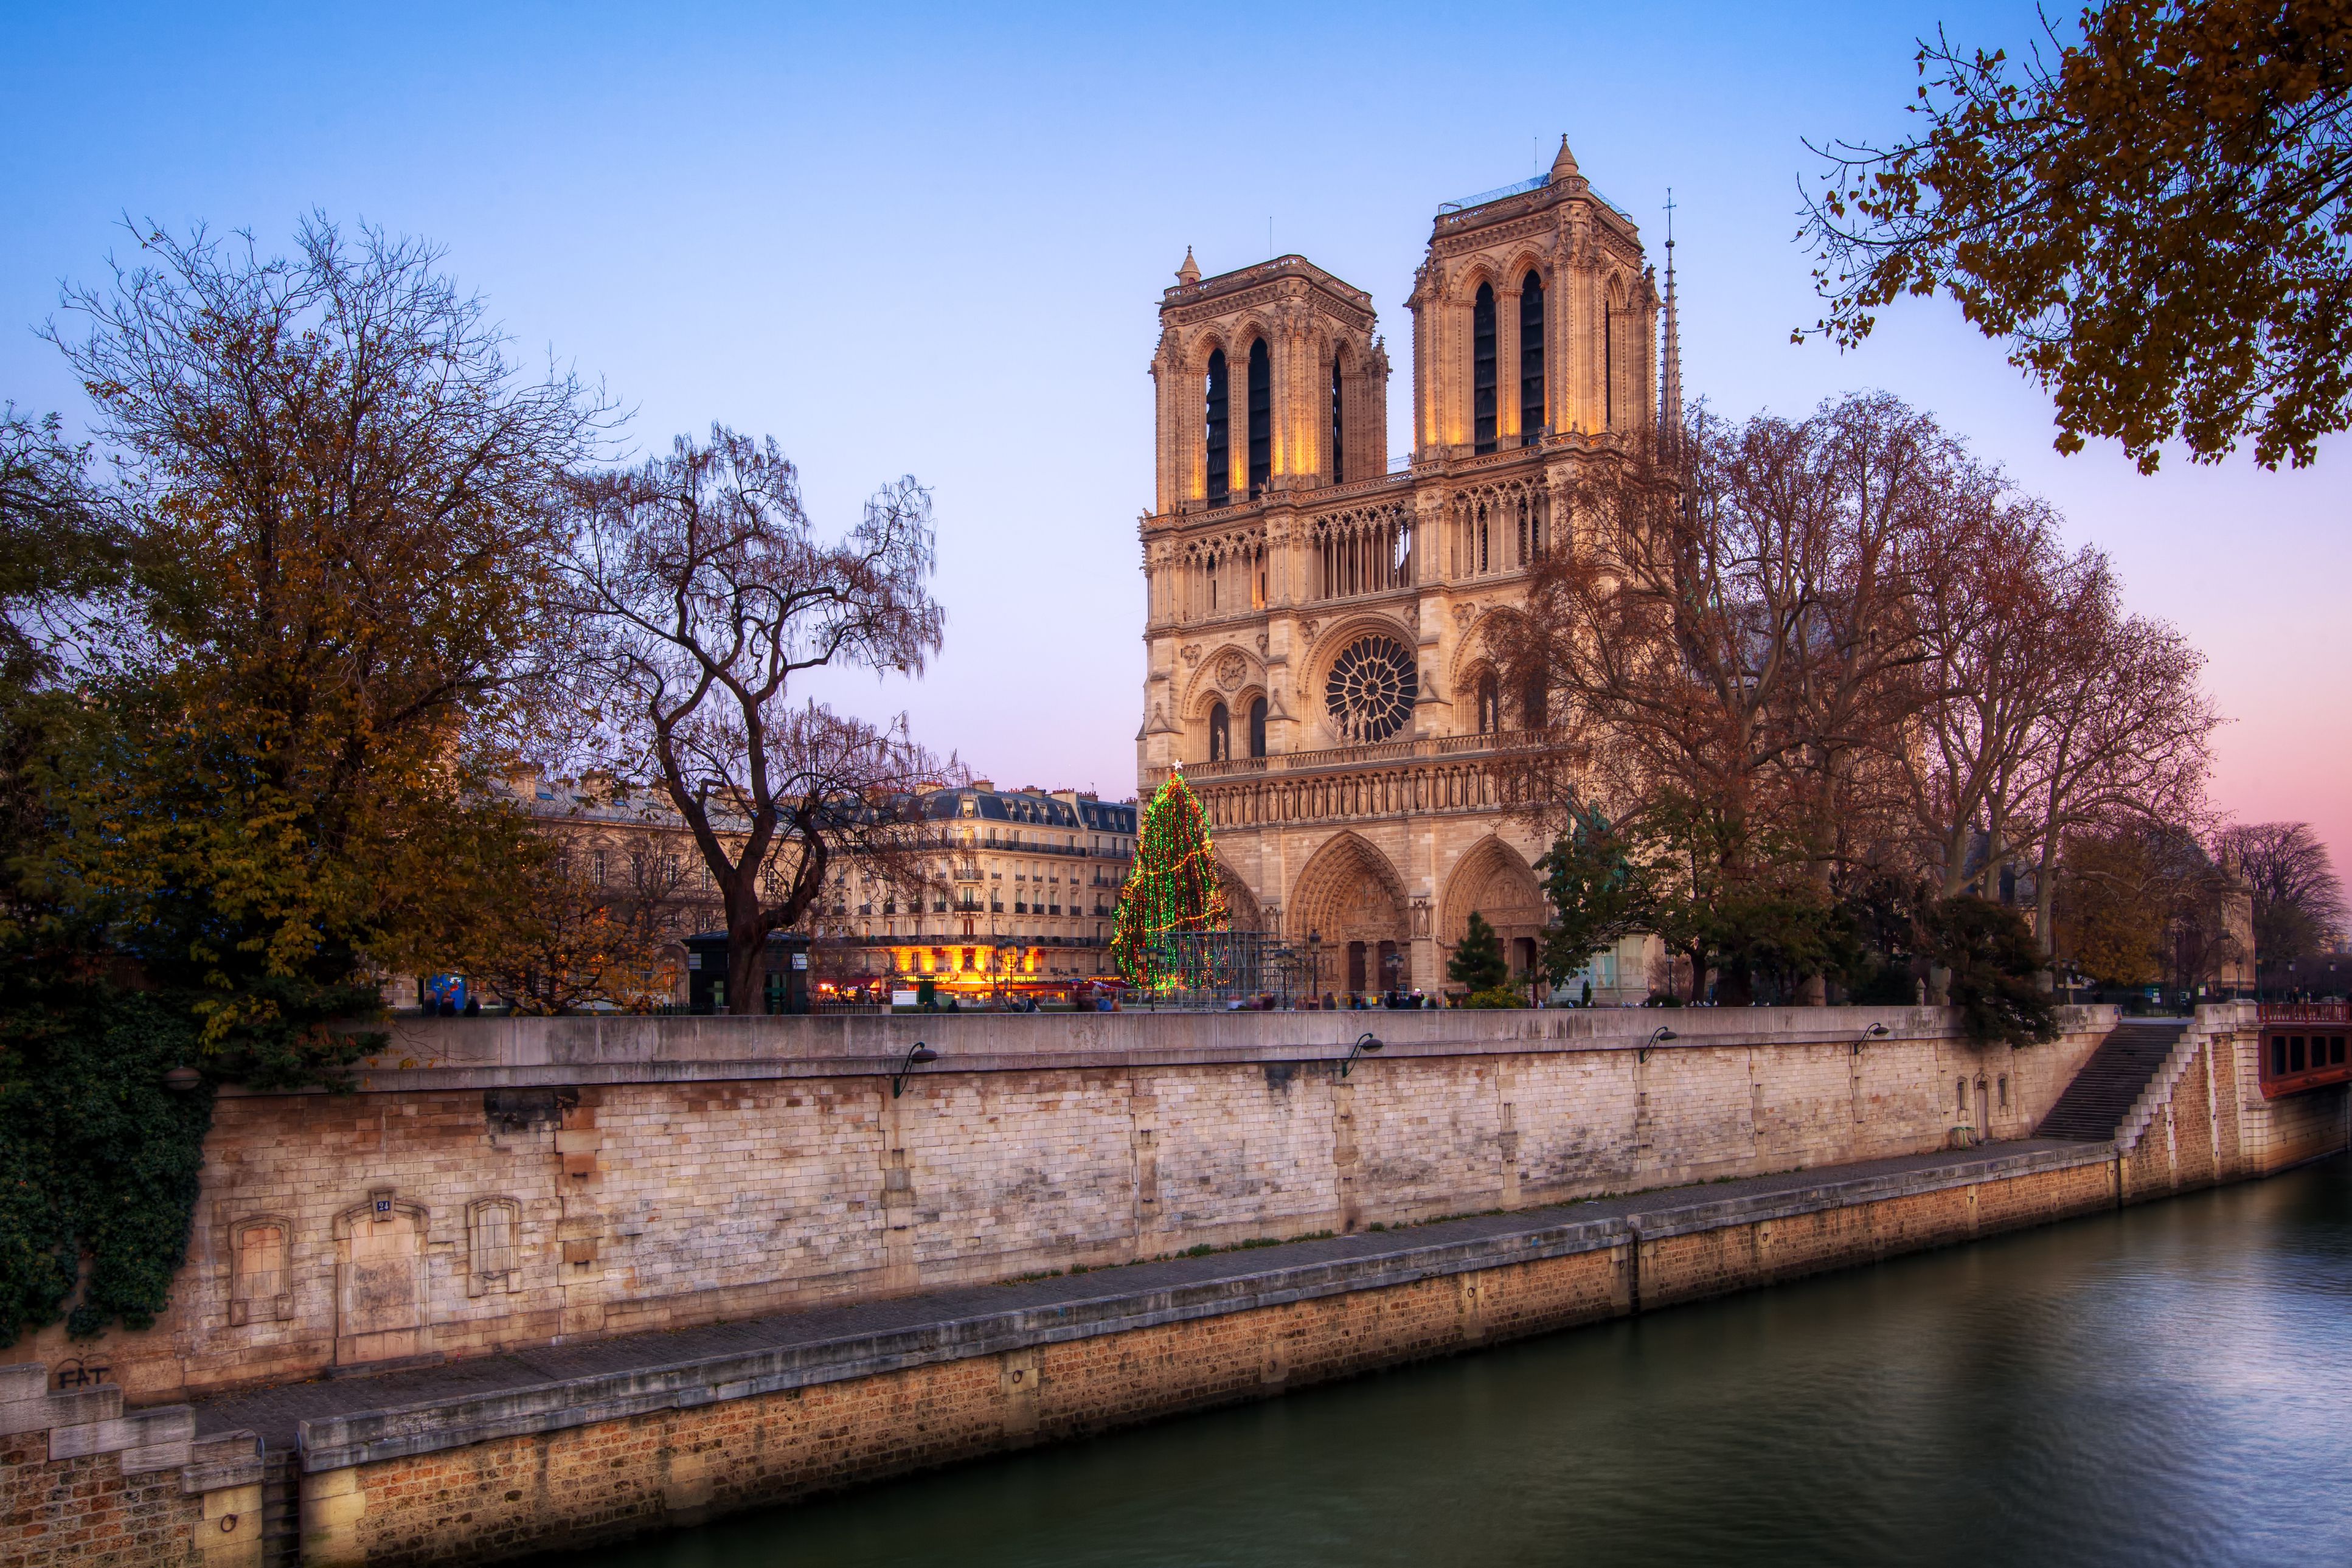 The 10 Most Beautiful Churches and Cathedrals in Paris